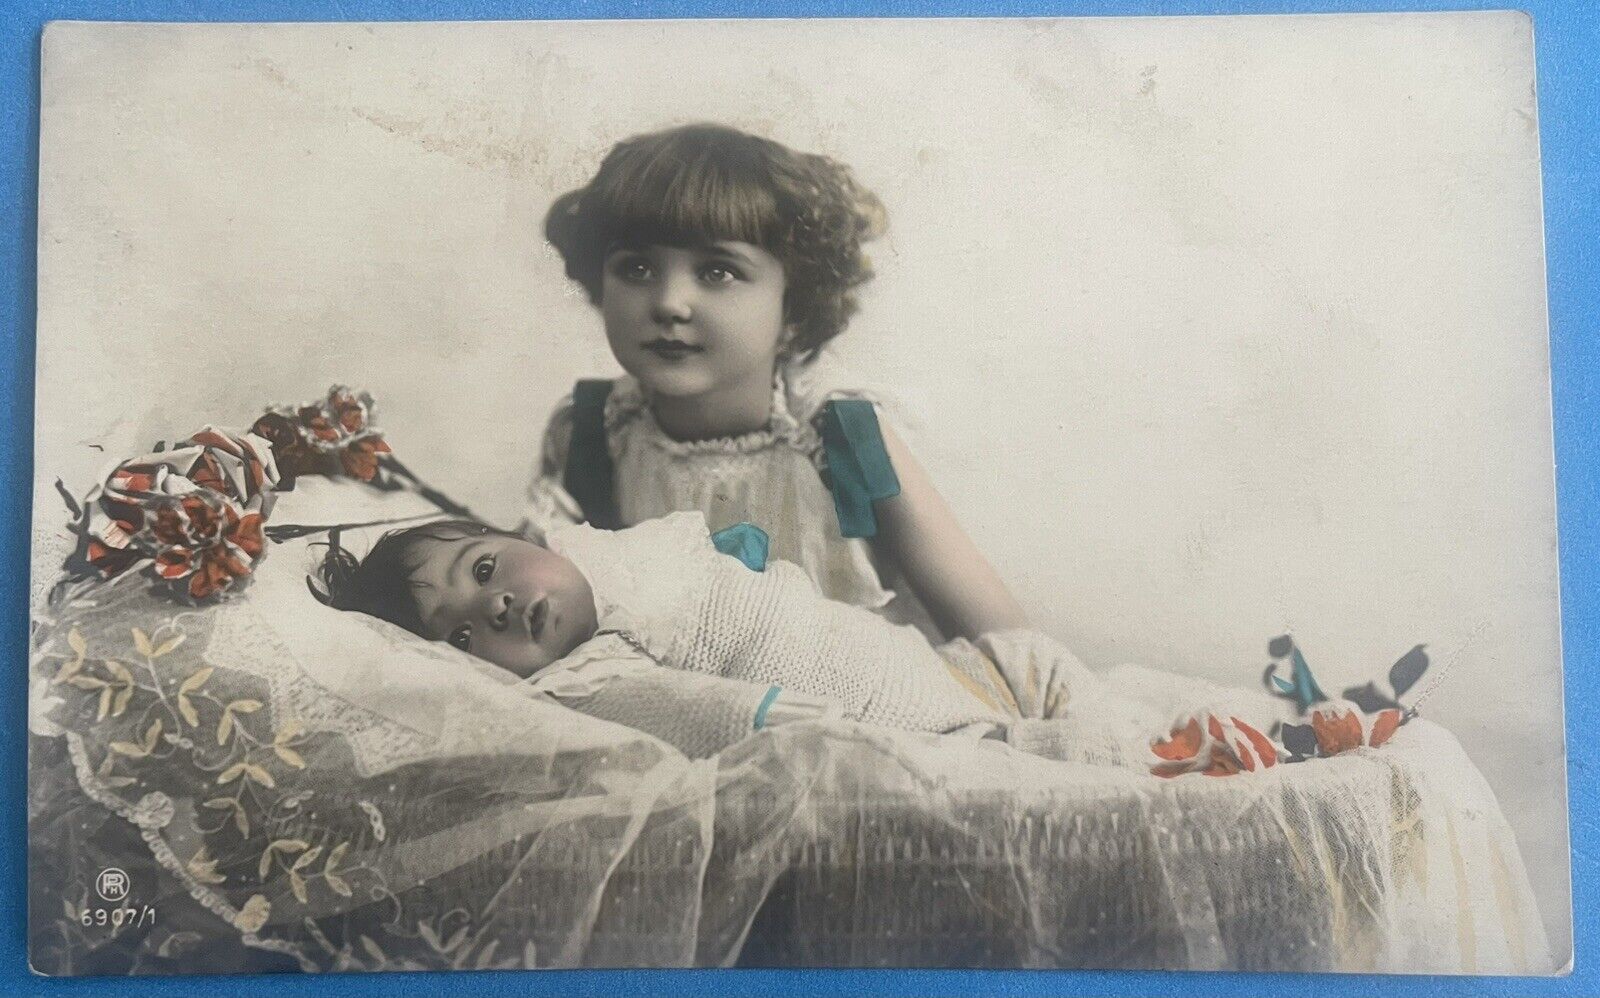 Vintage RPPC Rotophot Postcard - Adorable Sisters, Hand-Tinted, Early 1900s